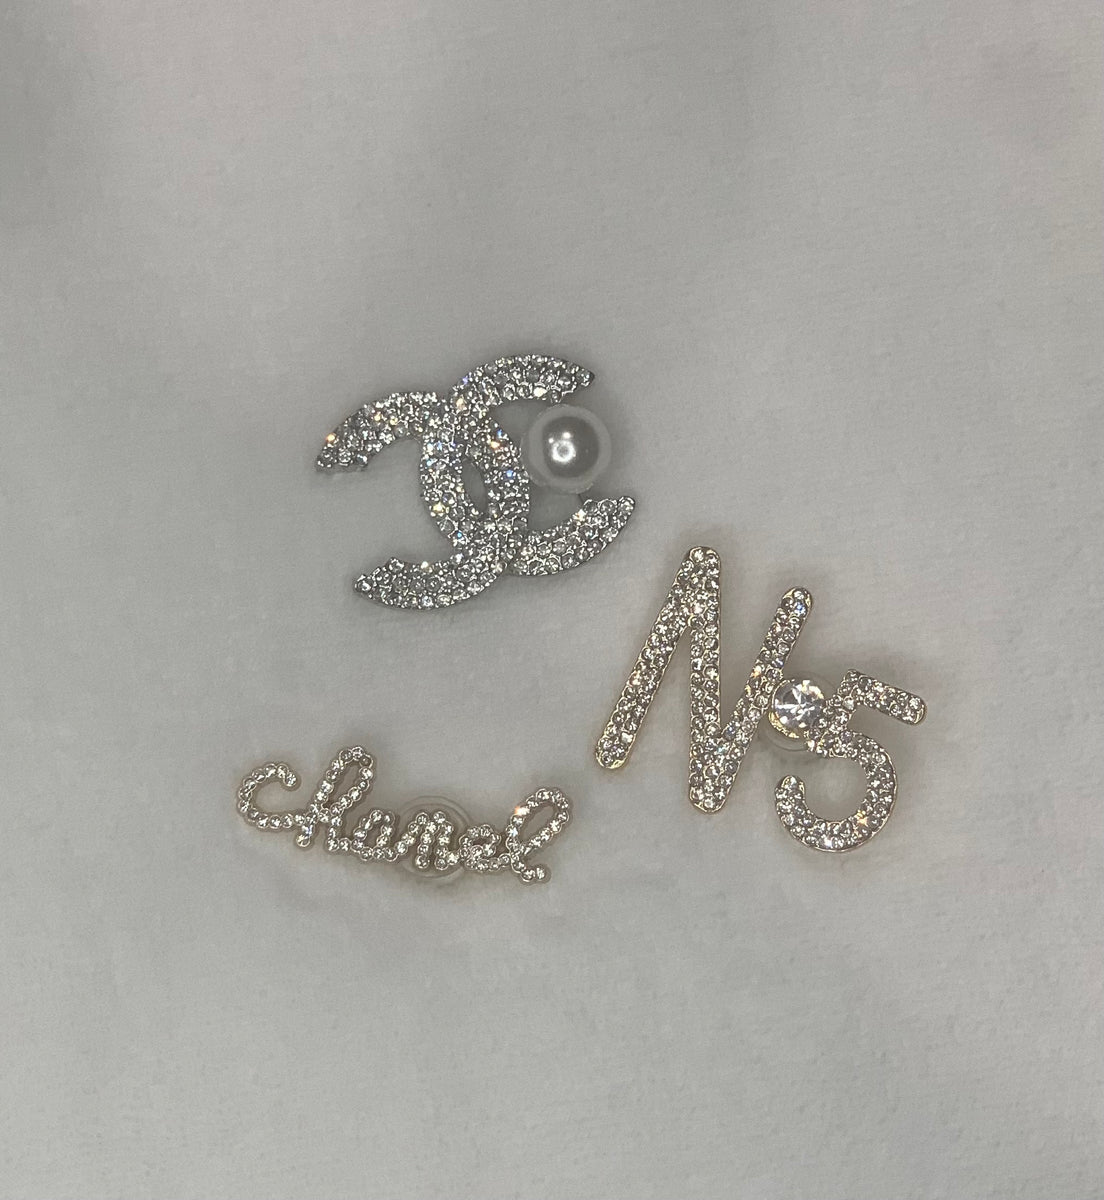 Elite Croc Shoe Charms - Bling Croc Charms - Bling Queen Crown Charm -  Bling Heart Charm - Pearl Flower Charm